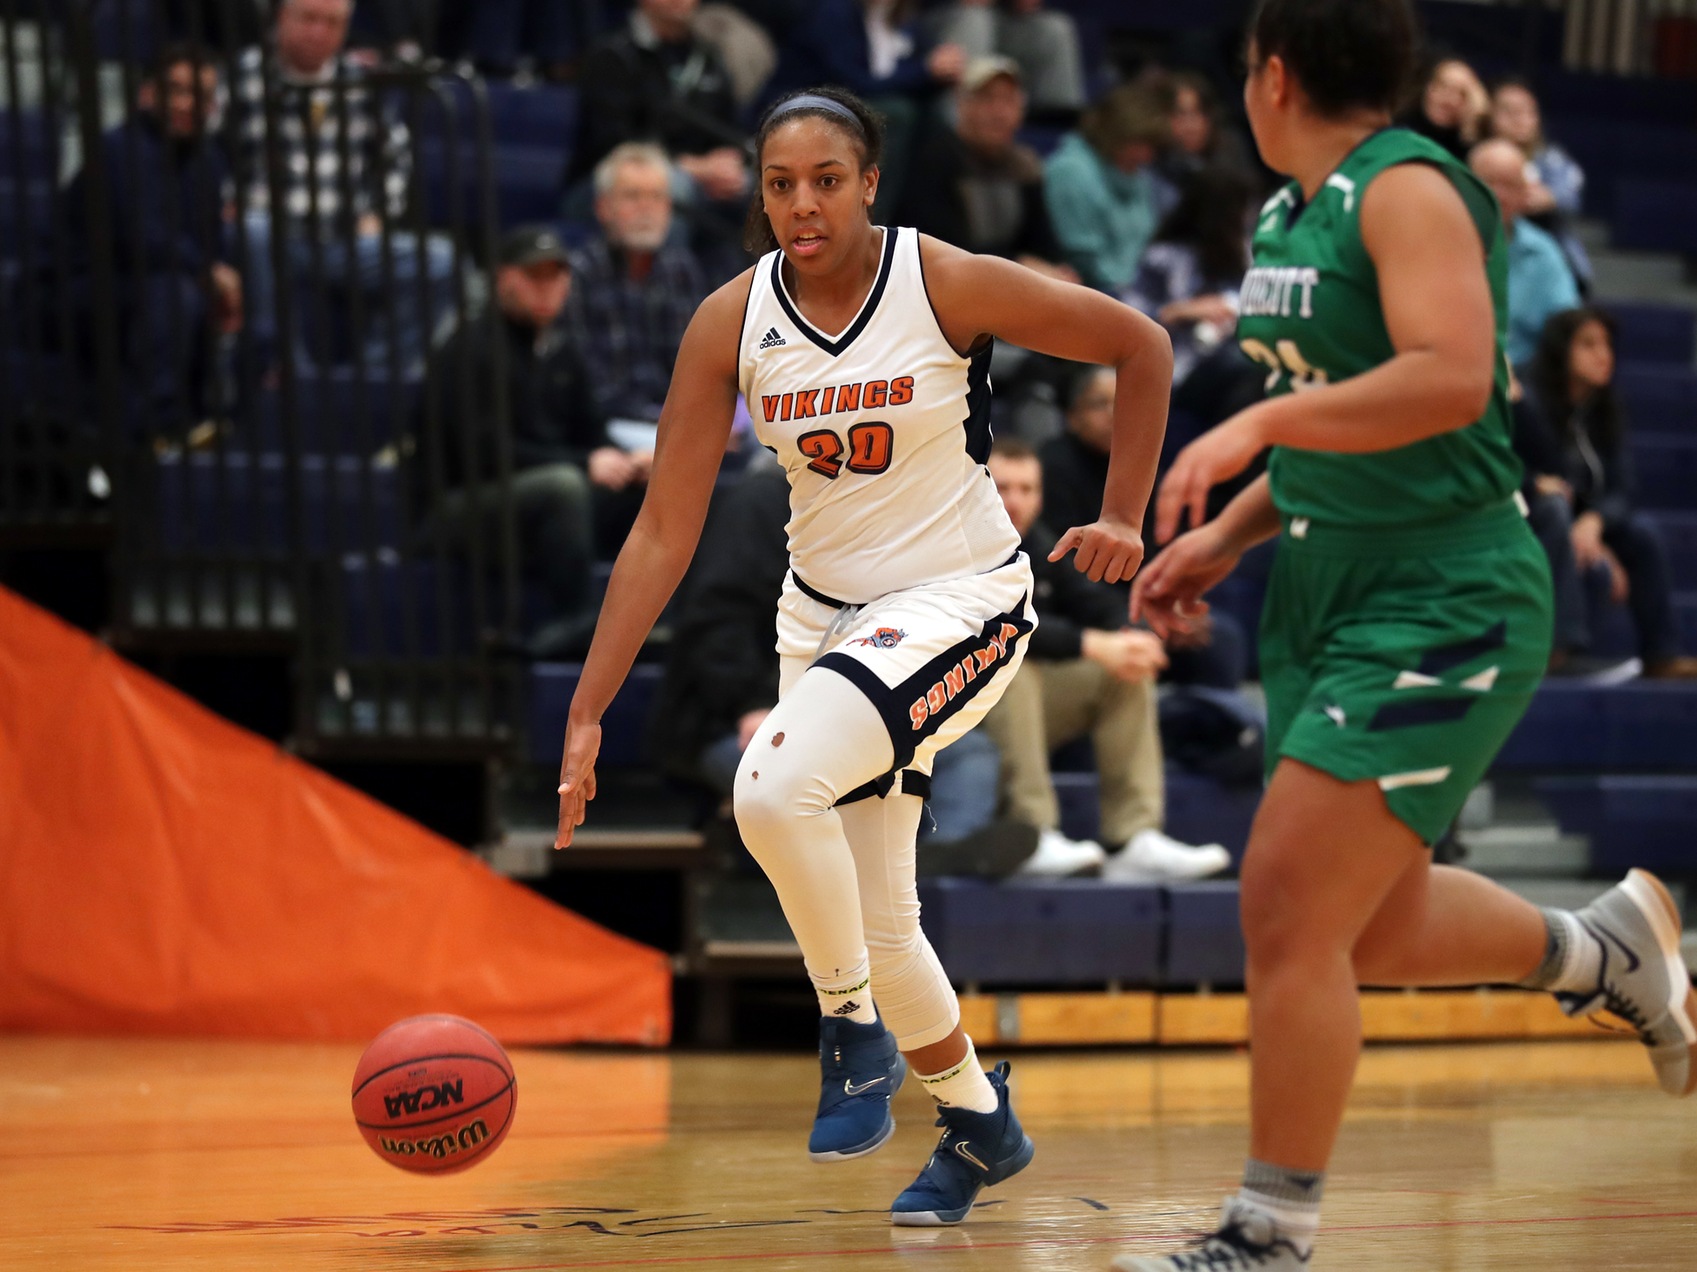 Salem State Earns Fifth Seed in Upcoming MASCAC Women's Basketball Tournament